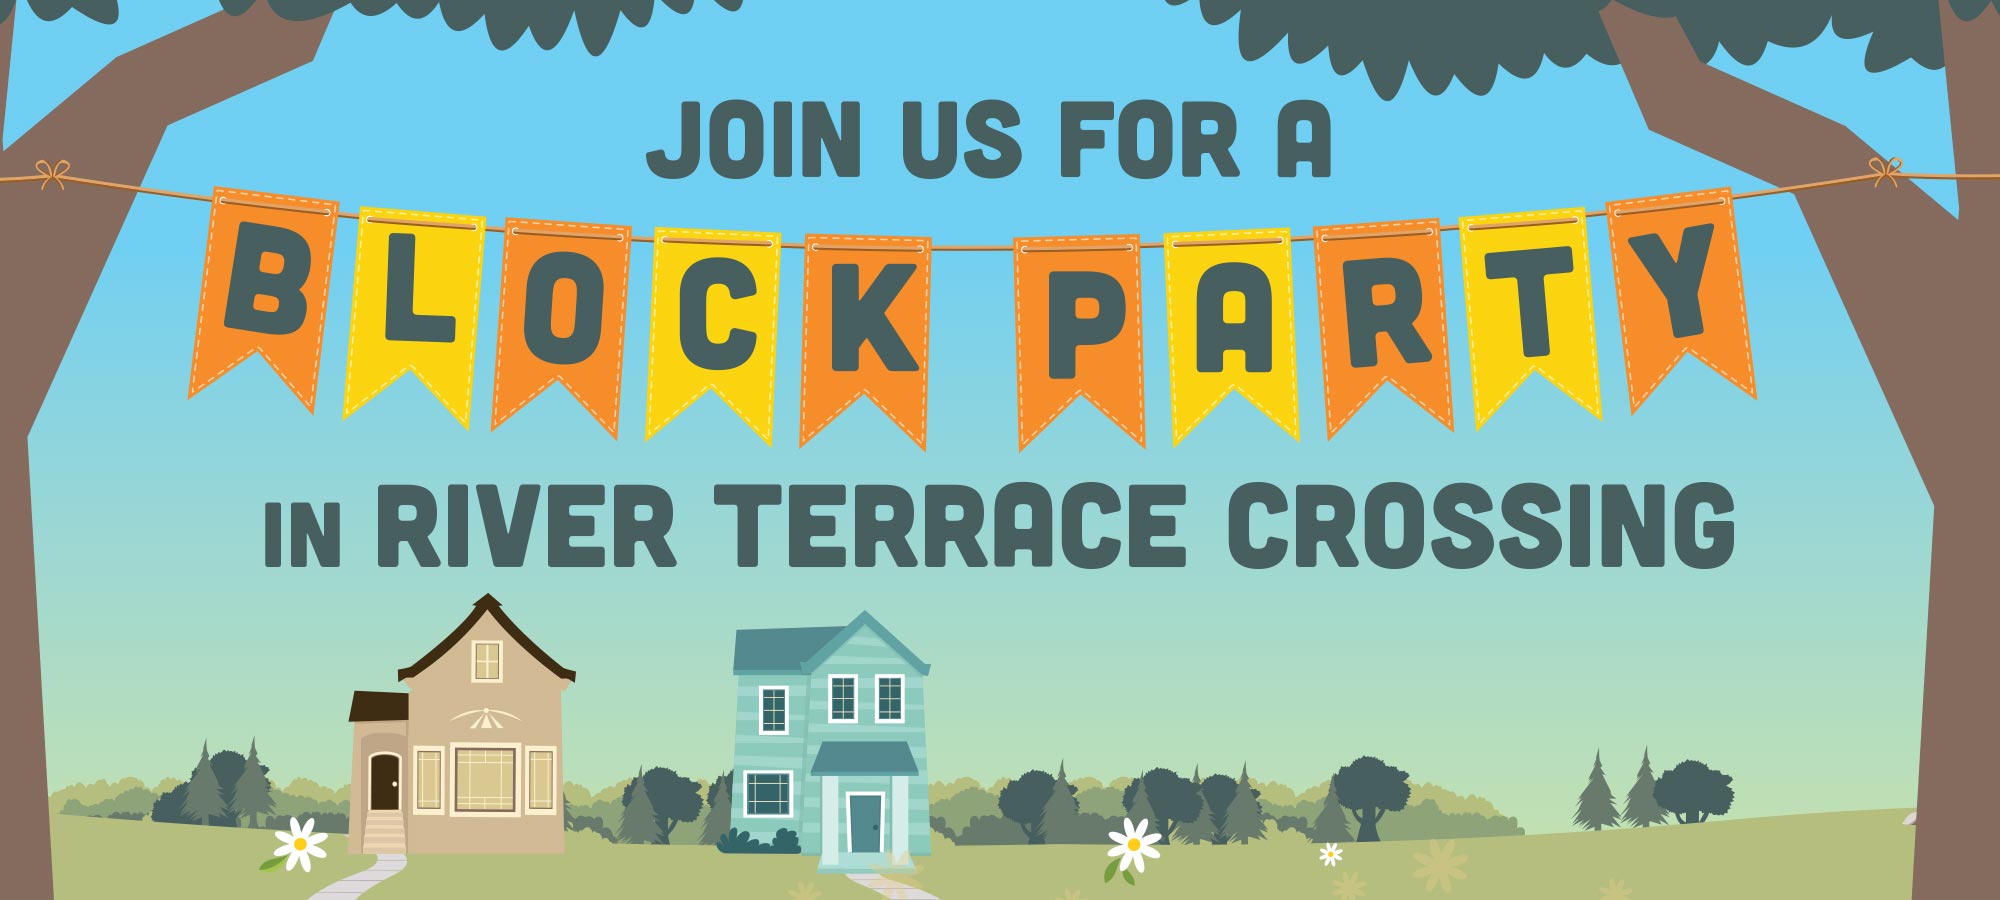 Join Us for a Block Party in River Terrace Crossing